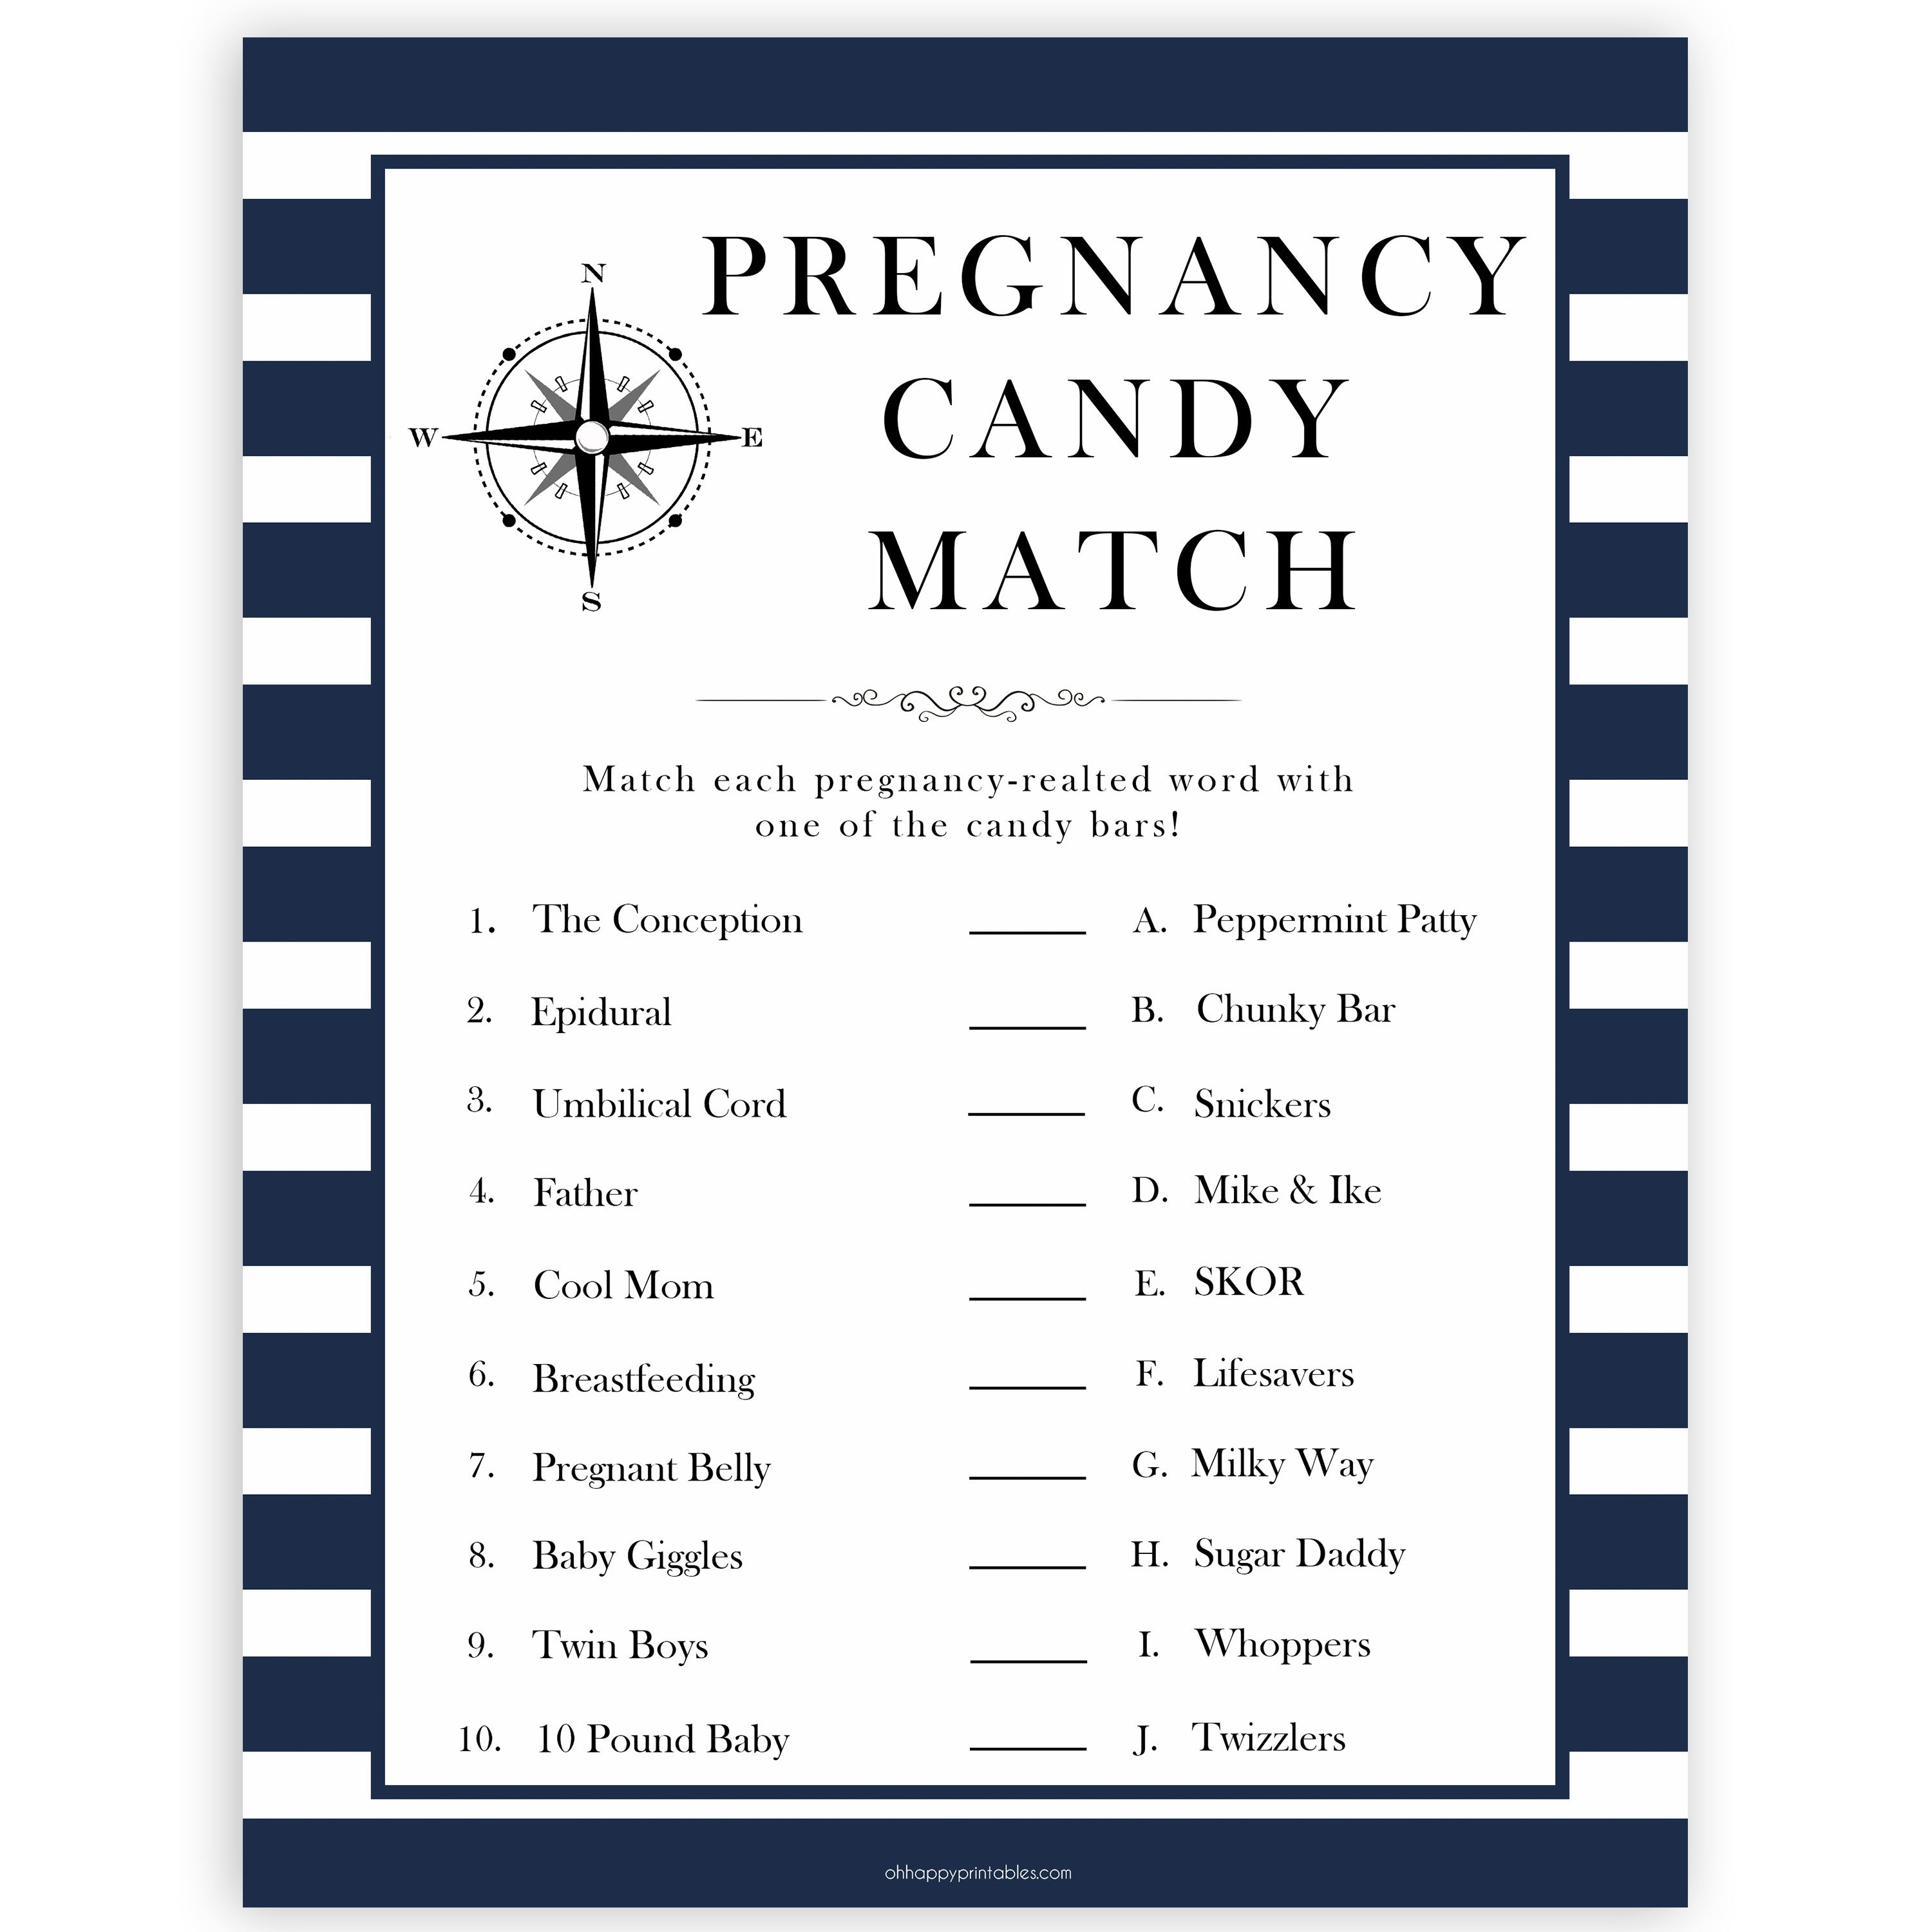 Nautical baby shower games, pregnancy candy match baby shower games, printable baby shower games, baby shower games, fun baby games, popular baby shower games, sailor baby games, boat baby games